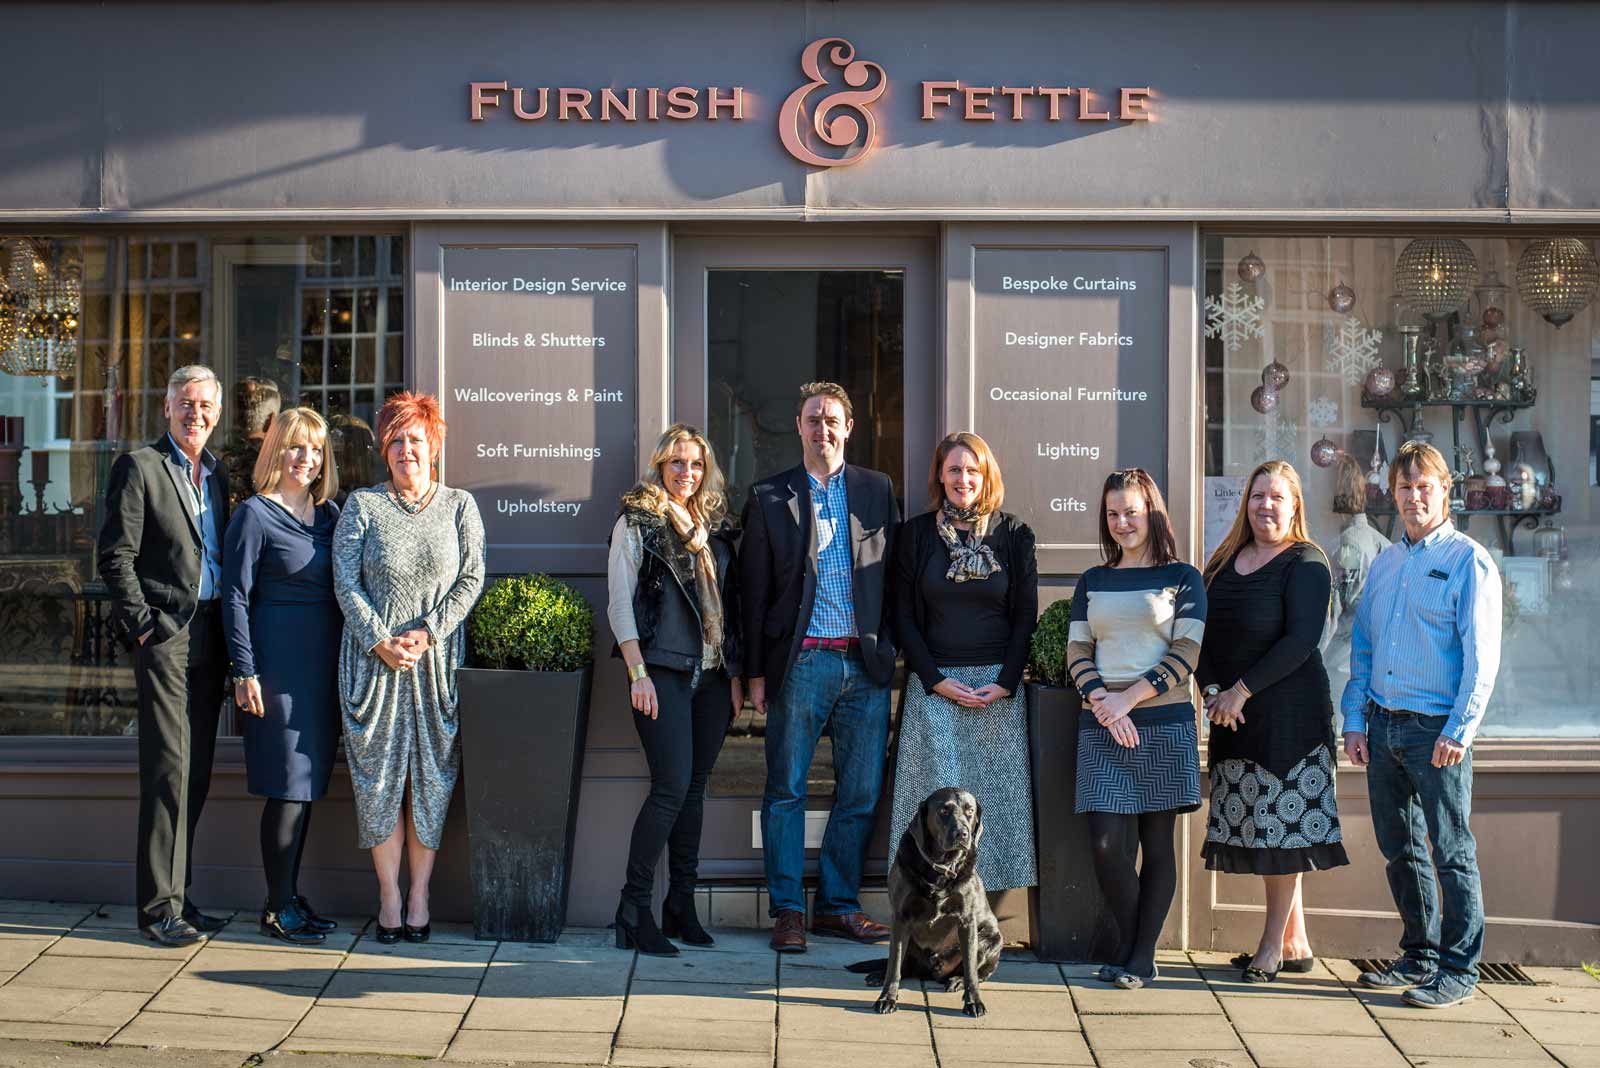 Furnish & Fettle, the Wetherby-based interior design firm,